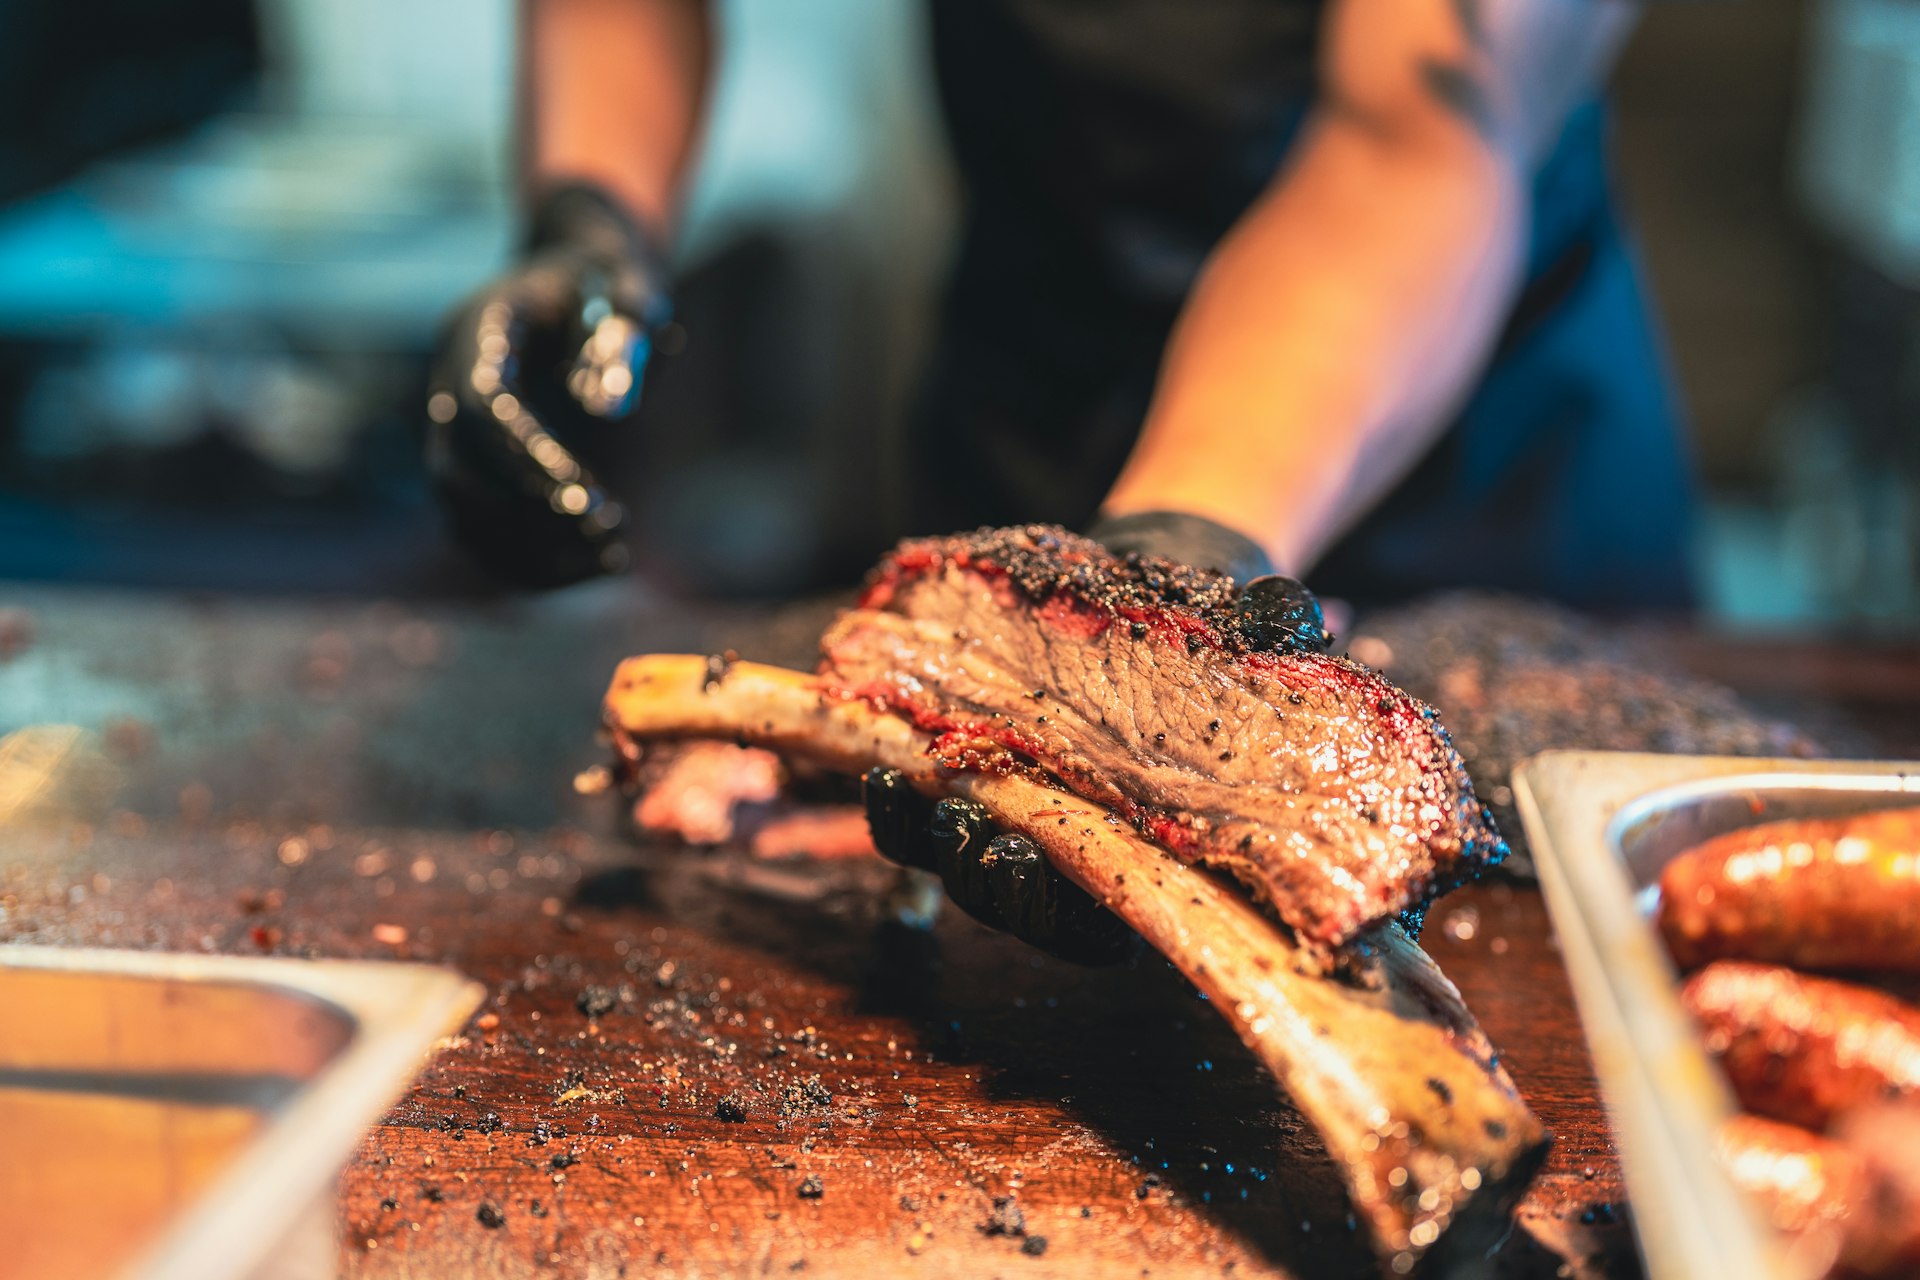 A Texas BBQ chef holding a portion of smoked brisket 